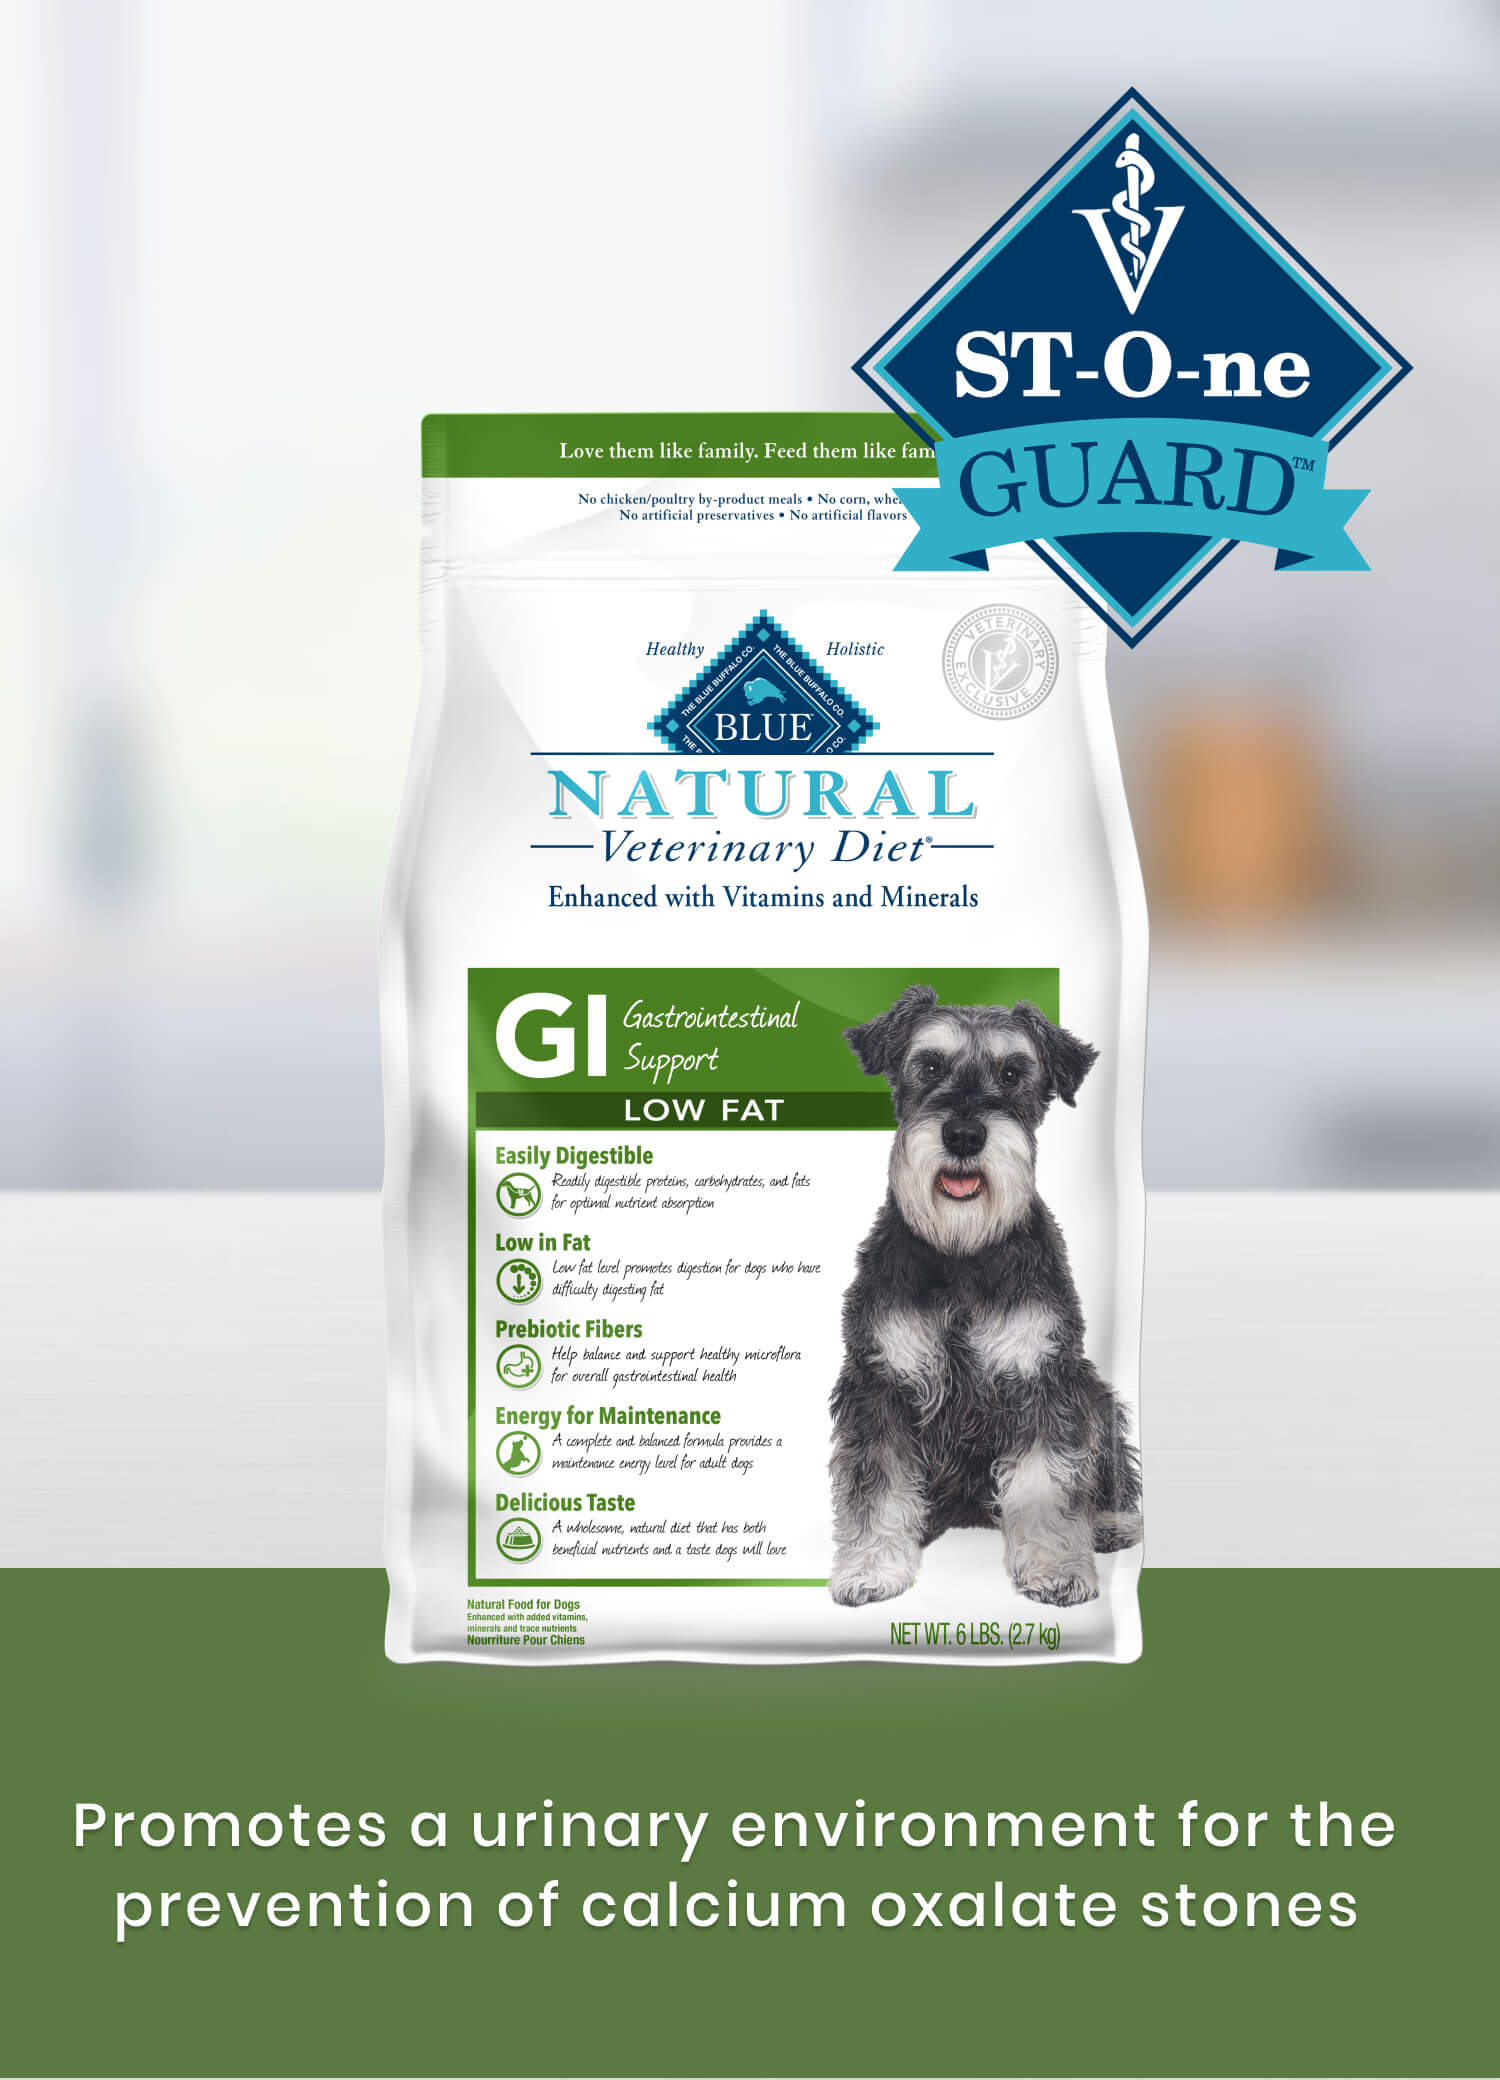 GI Gastrointestinal Support Low Fat St-O-ne Guard Promotes a urinary environment for the prevention of calcium oxalate stones